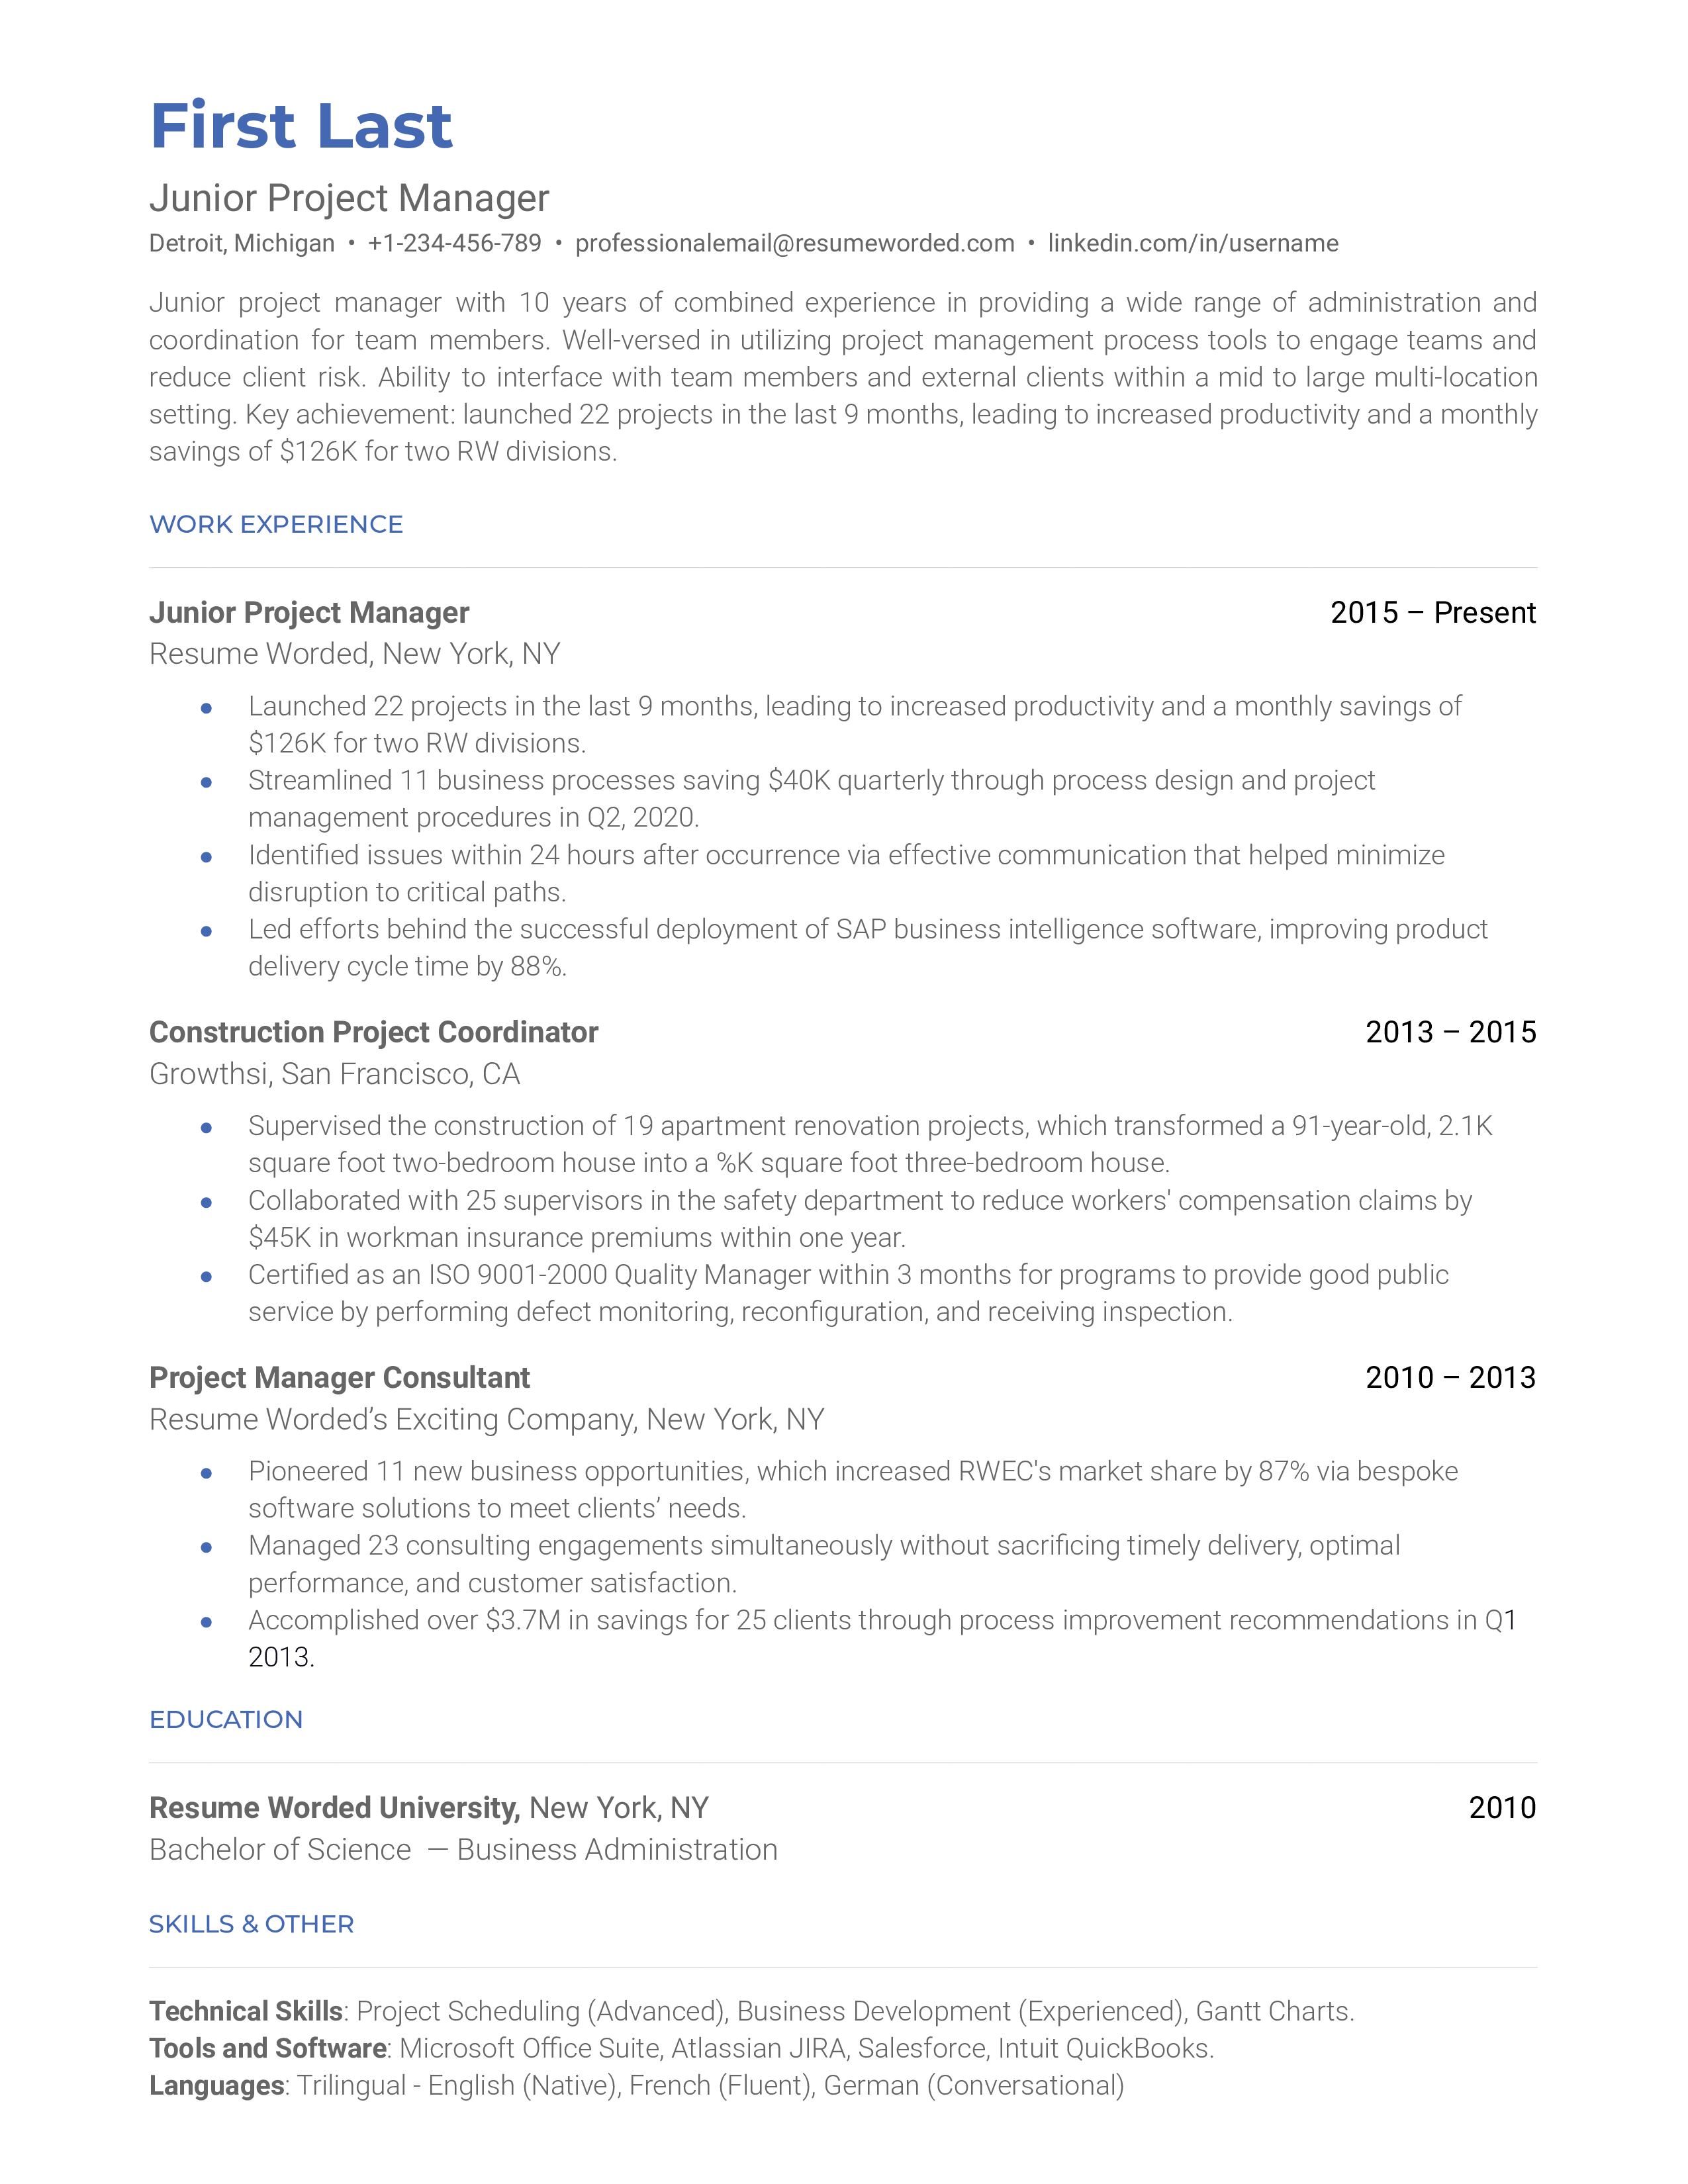 A junior project manager resume sample that highlights the applicant's long and successful experience history.